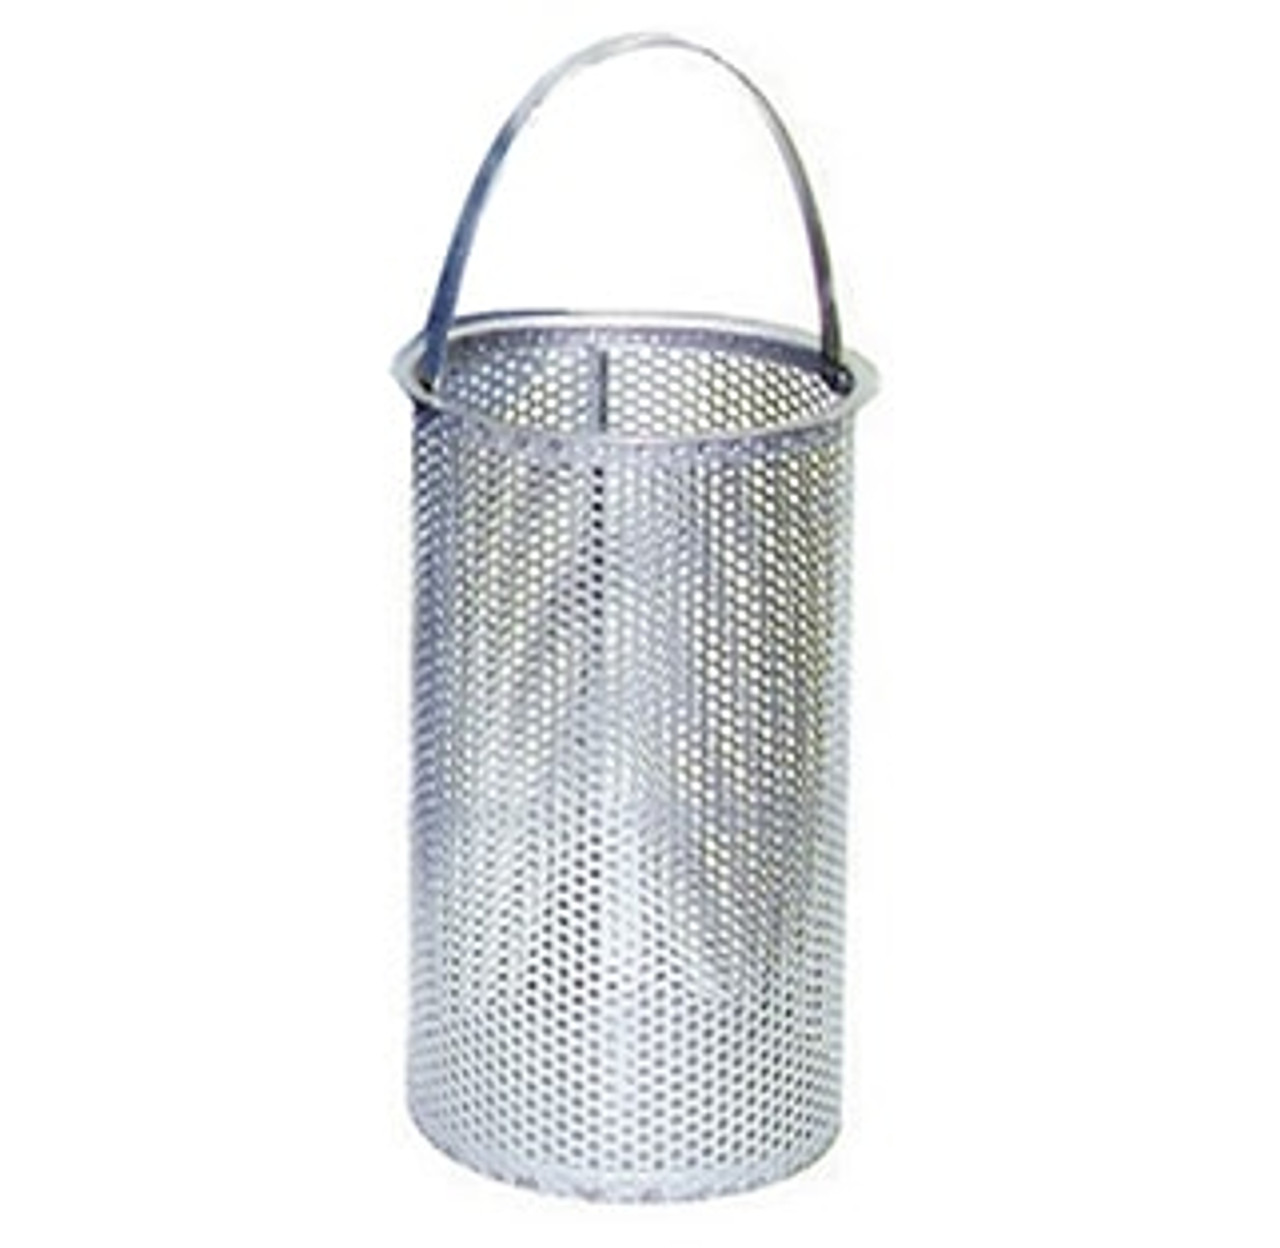 5/32" Perforated Replacement Basket for 3" Eaton Model 53BTX Strainer